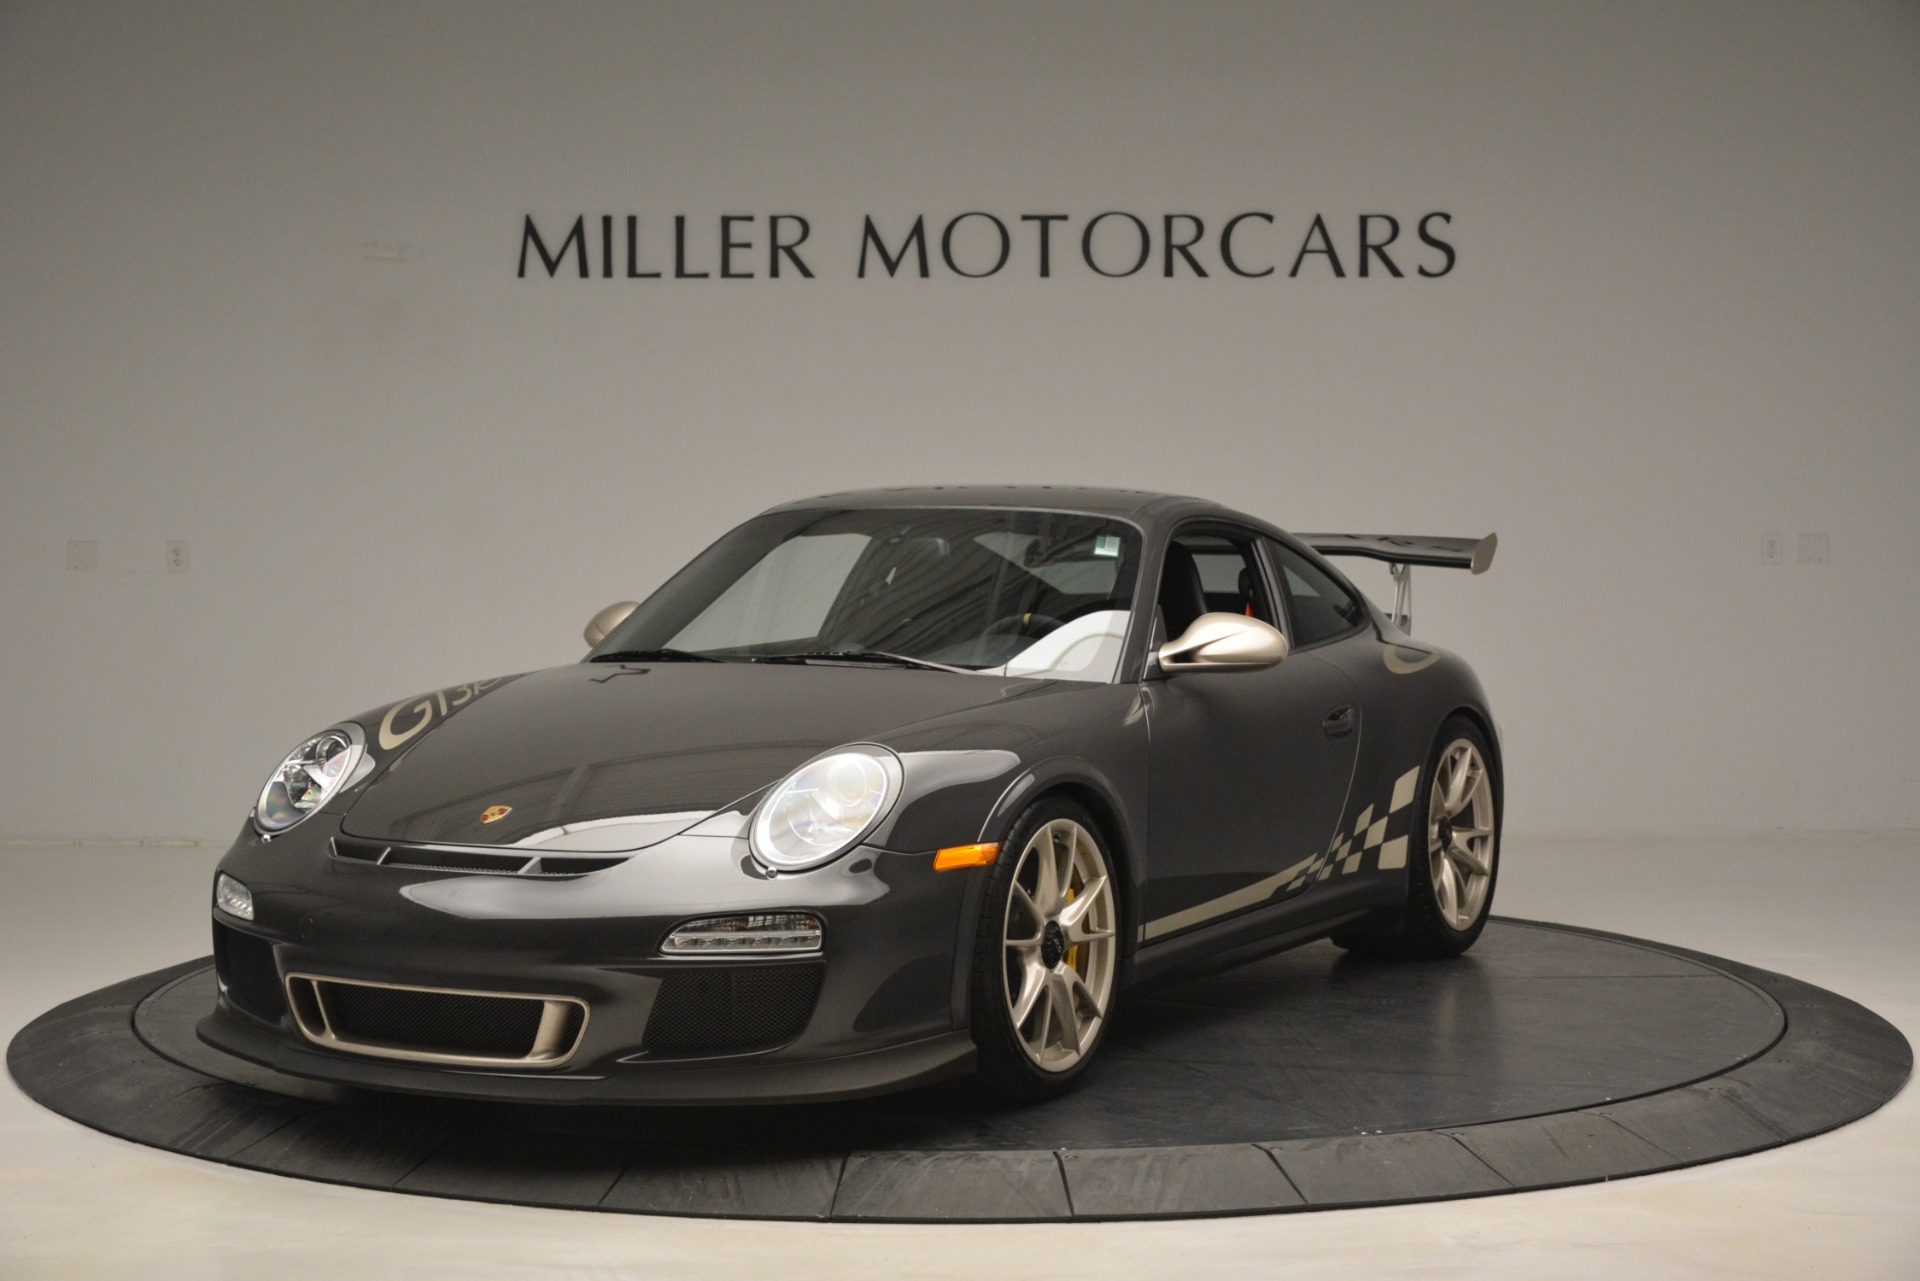 Used 2011 Porsche 911 GT3 RS